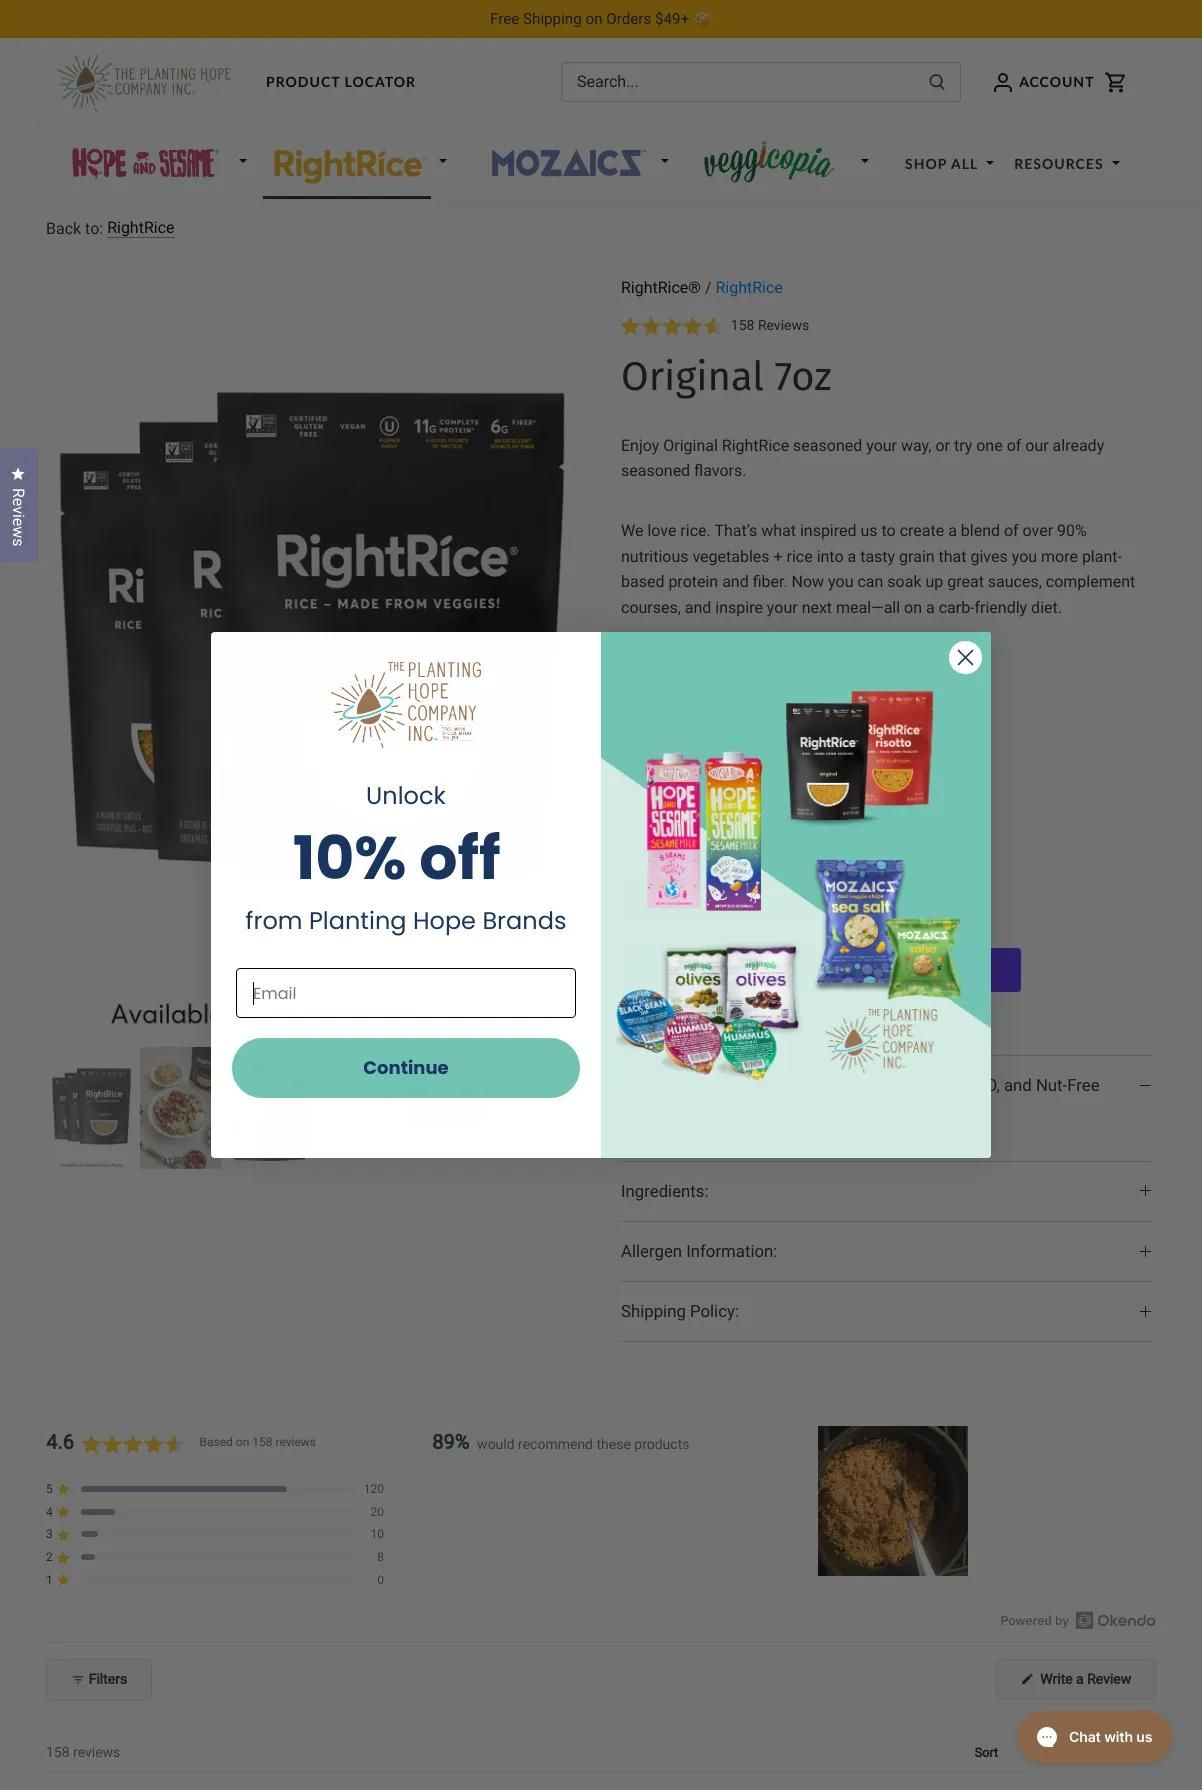 Screenshot 2 of RightRice (Example Shopify Food and Beverage Website)